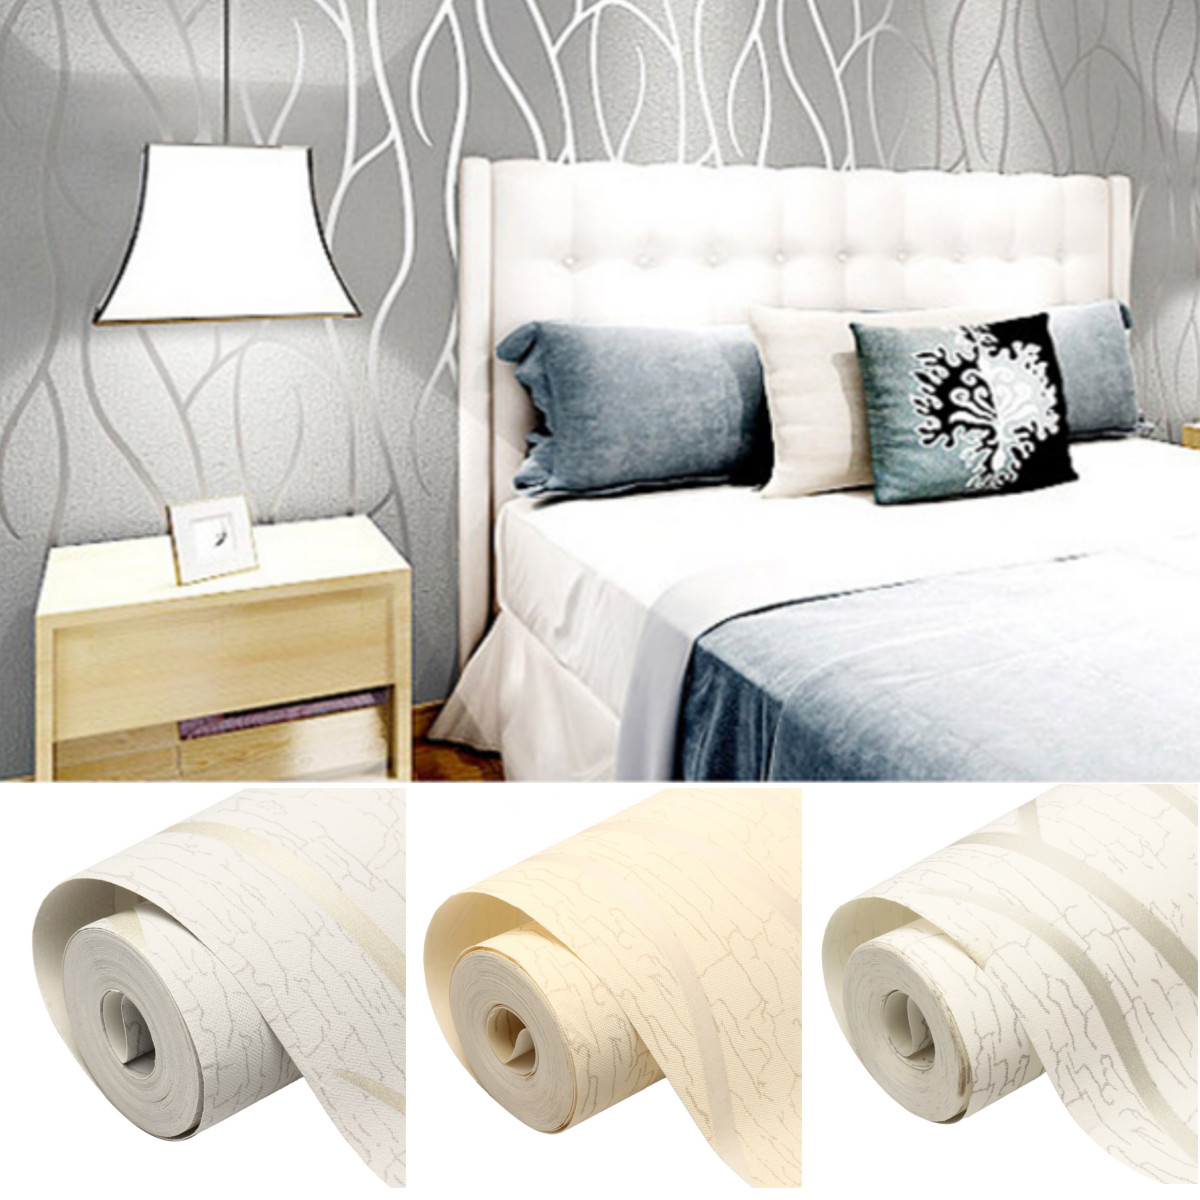 

10M 3D Non-woven Wave Stripe Embossed paper Rolls Bedroom Living Room Wall Sticker